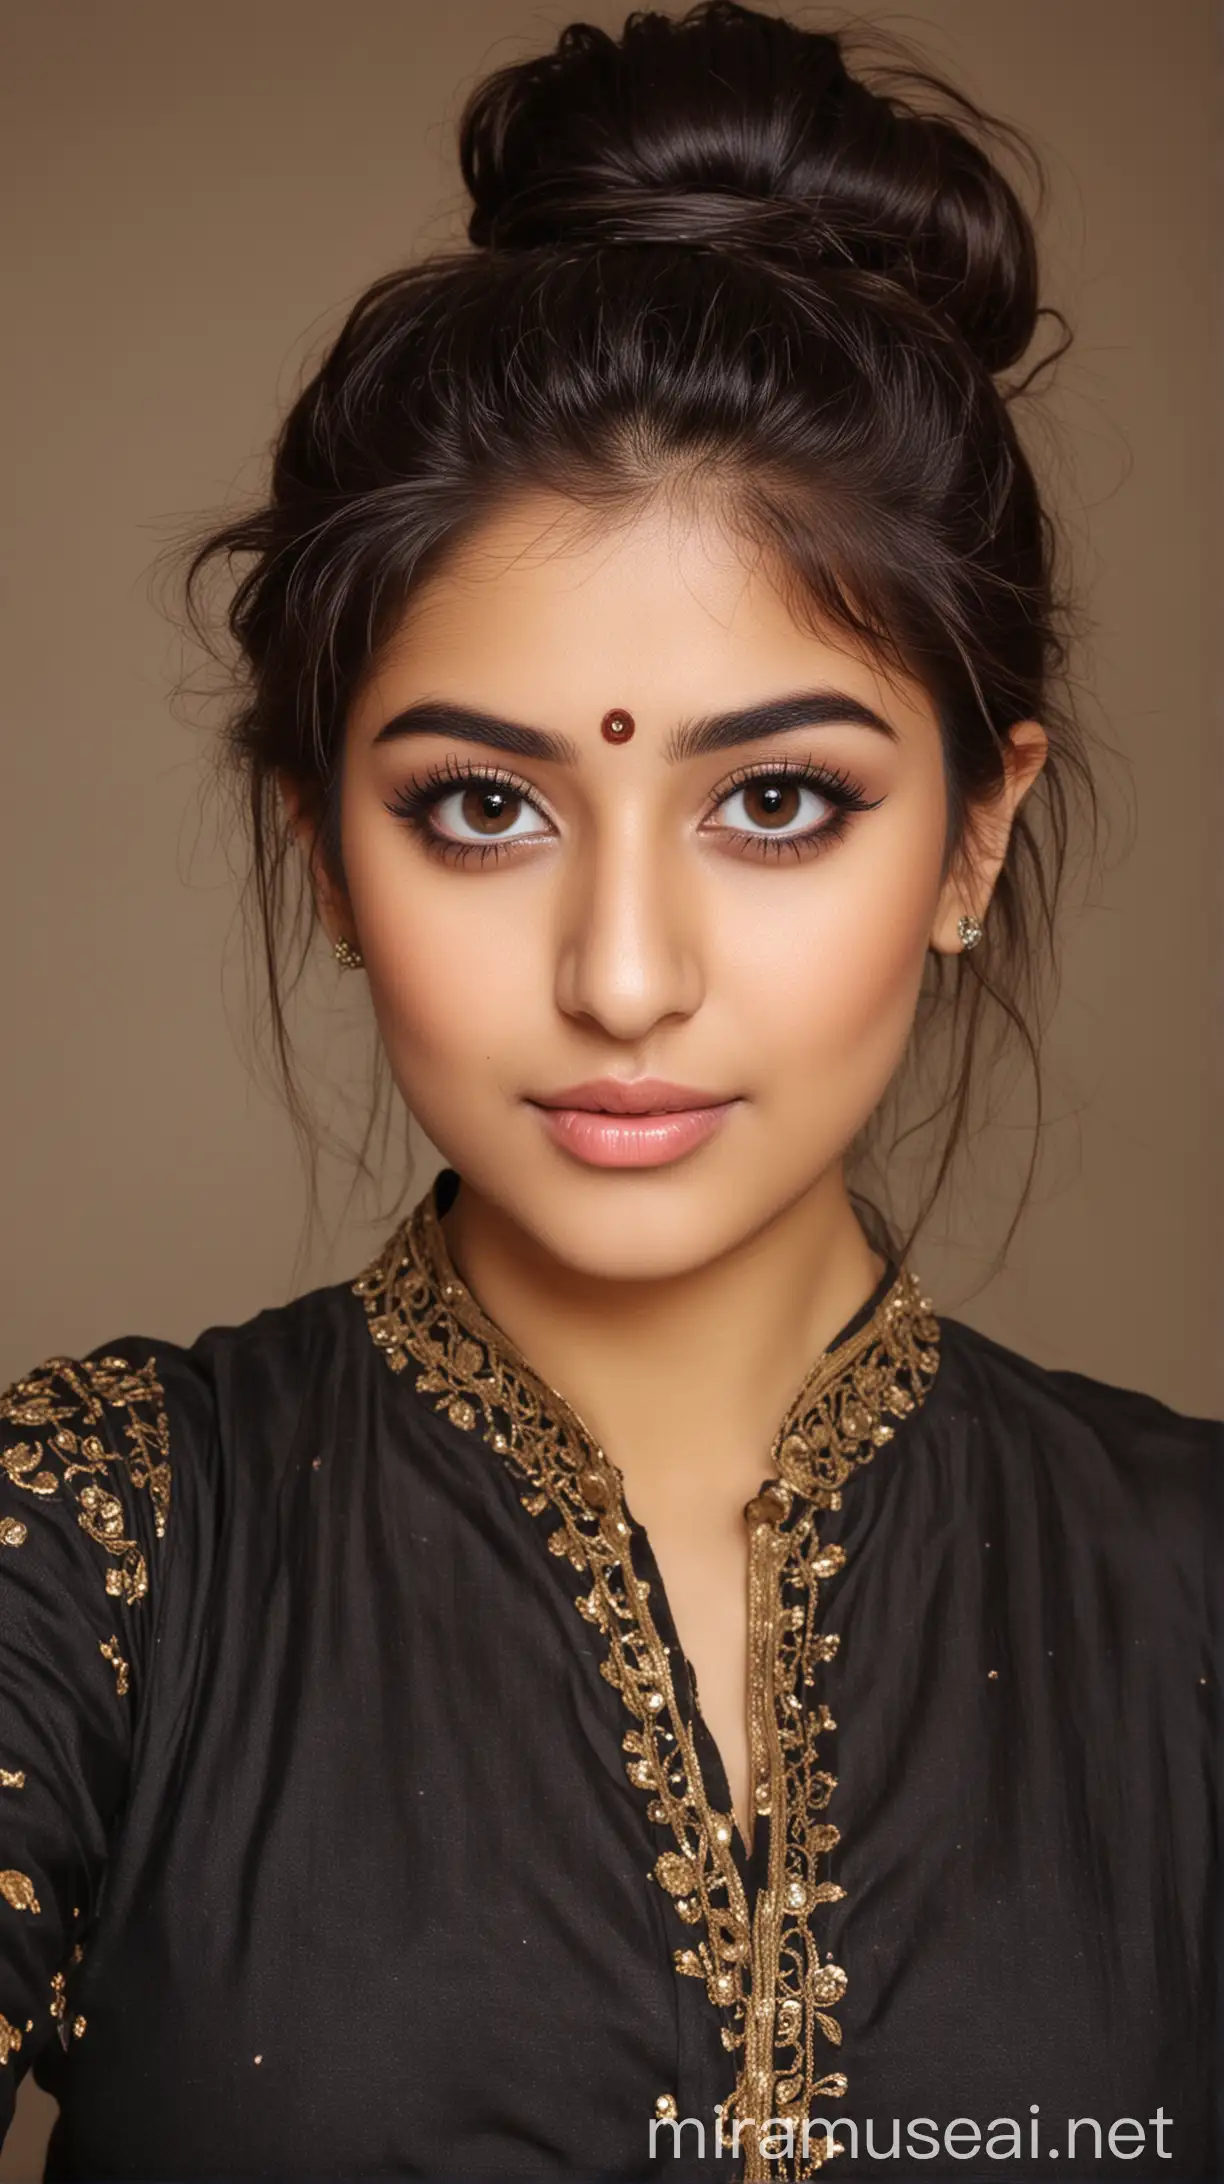 Portrait of a Pakistani Girl with a Cute Face and Messy Hair Bun in Indian Makeup Medium Shot Photo